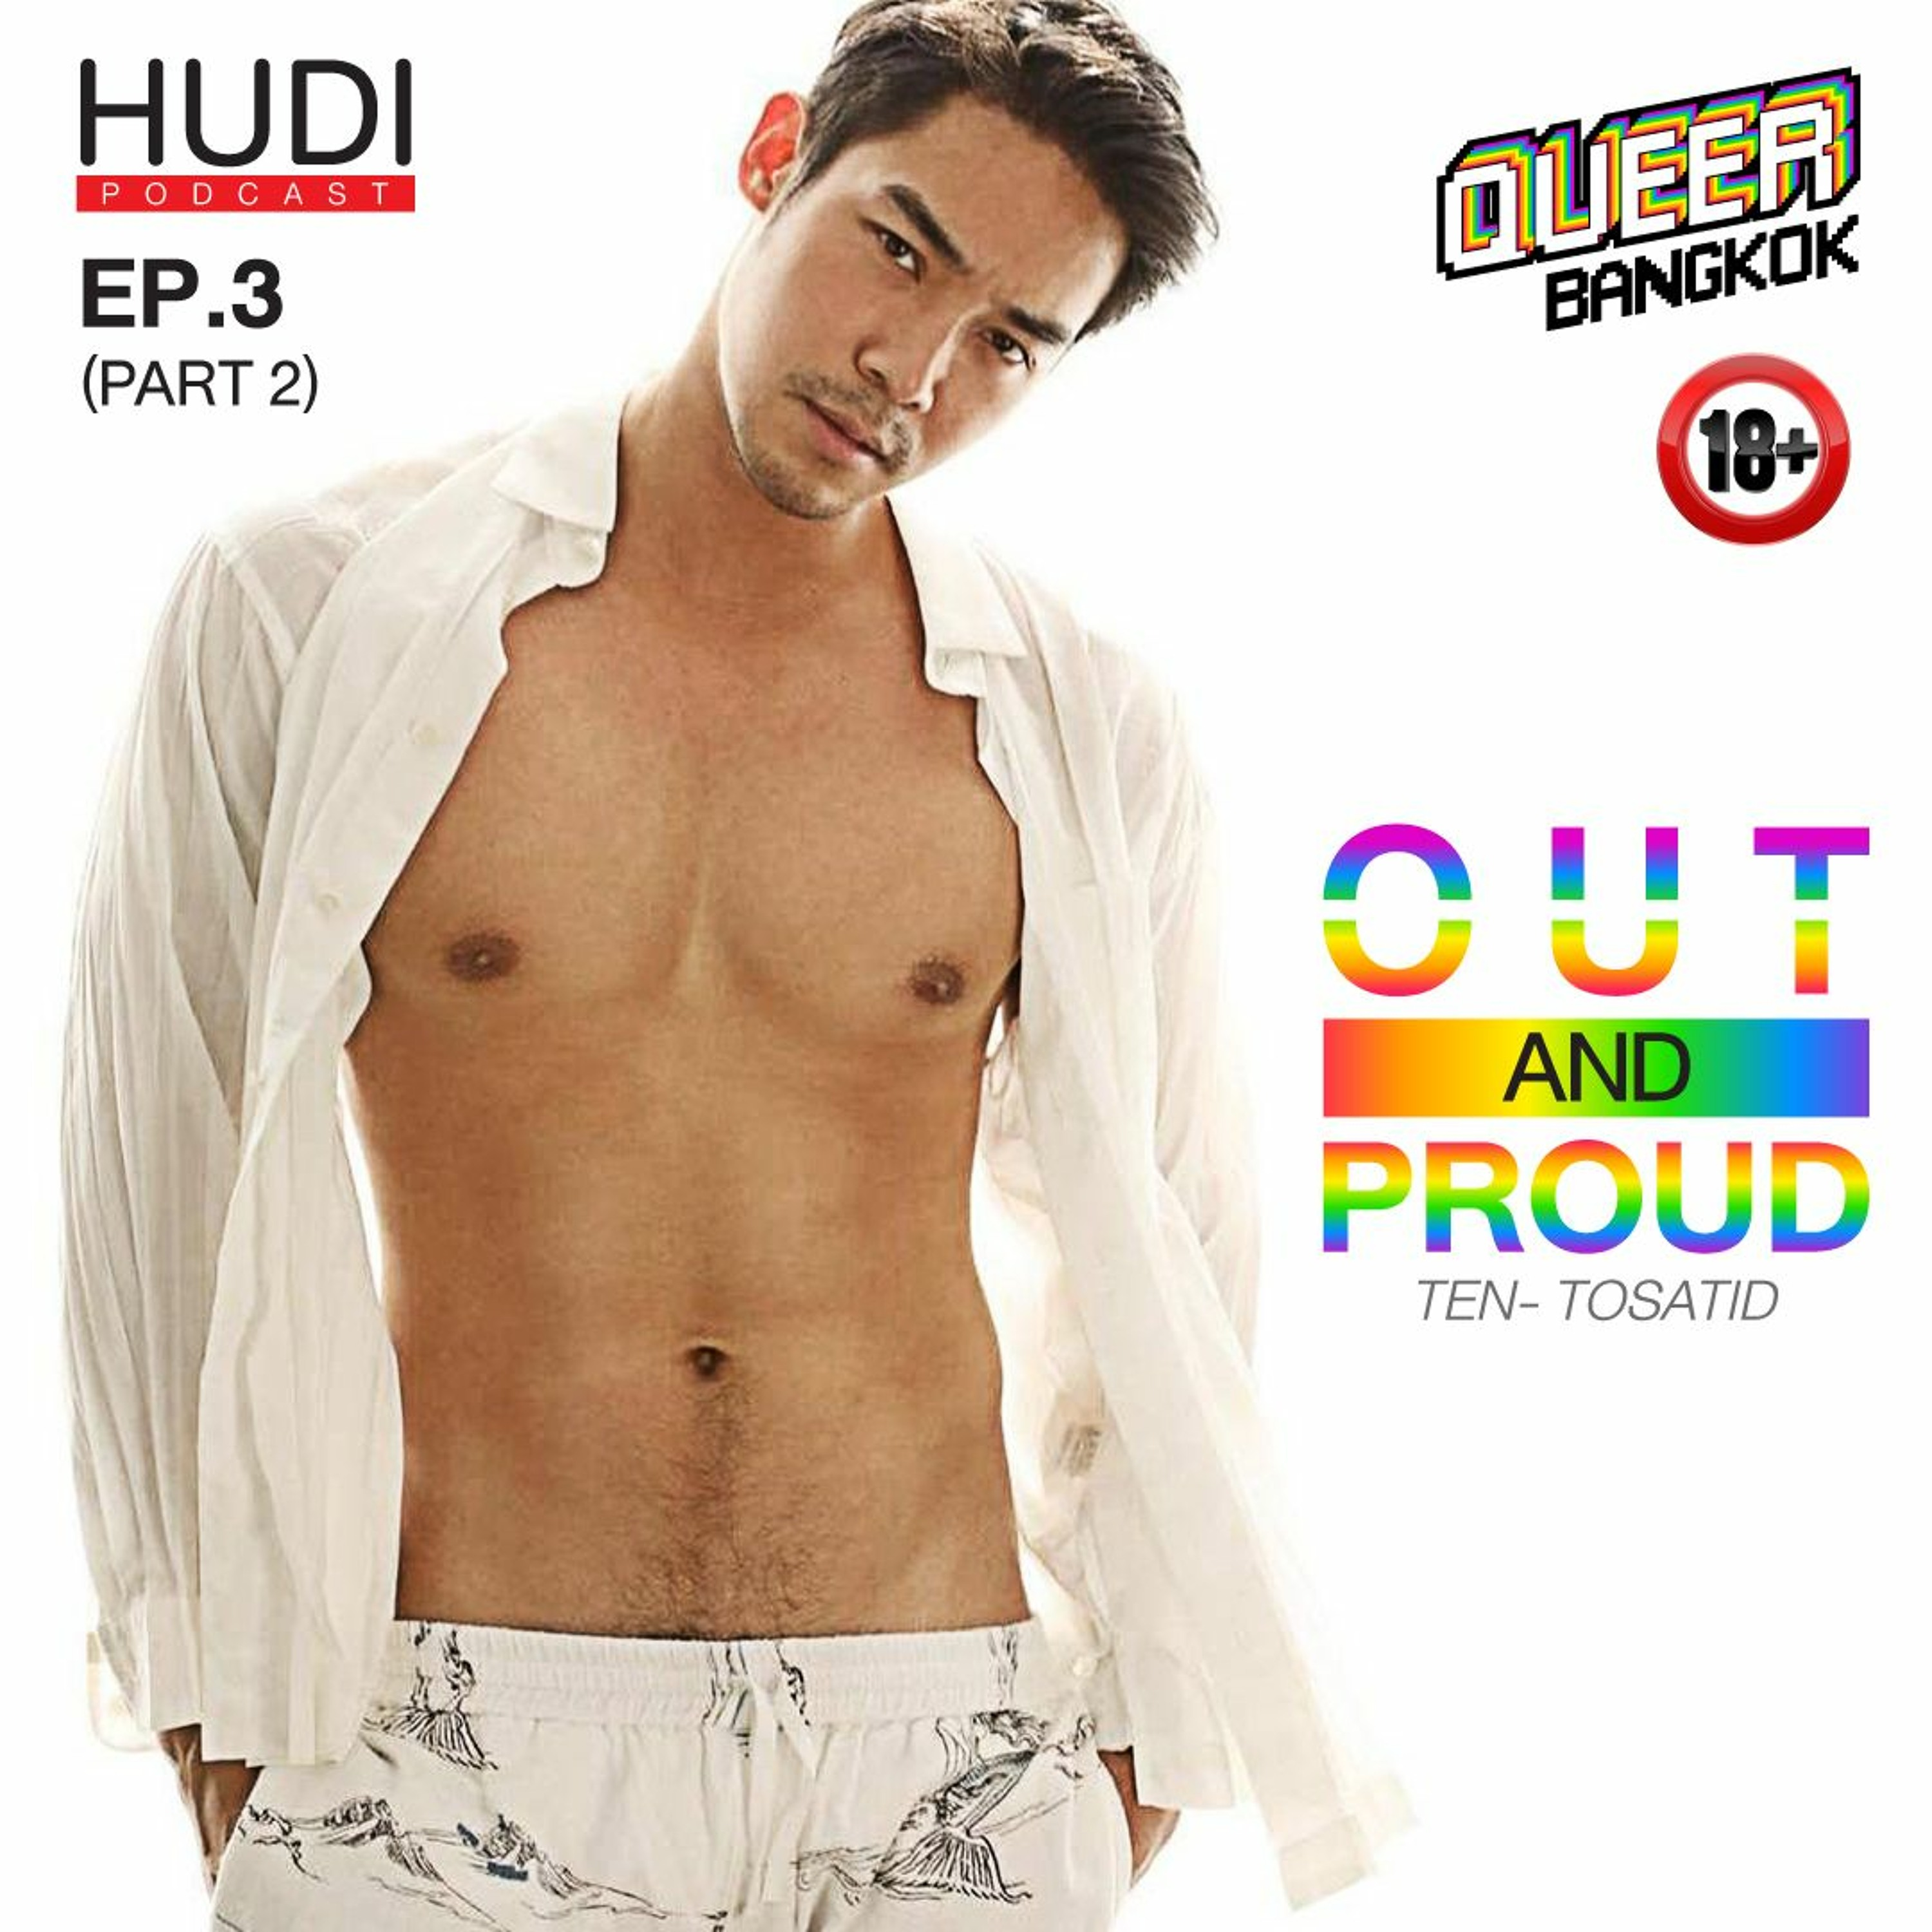 Queer Bangkok Ep.03 - Out and Proud (Part 2)